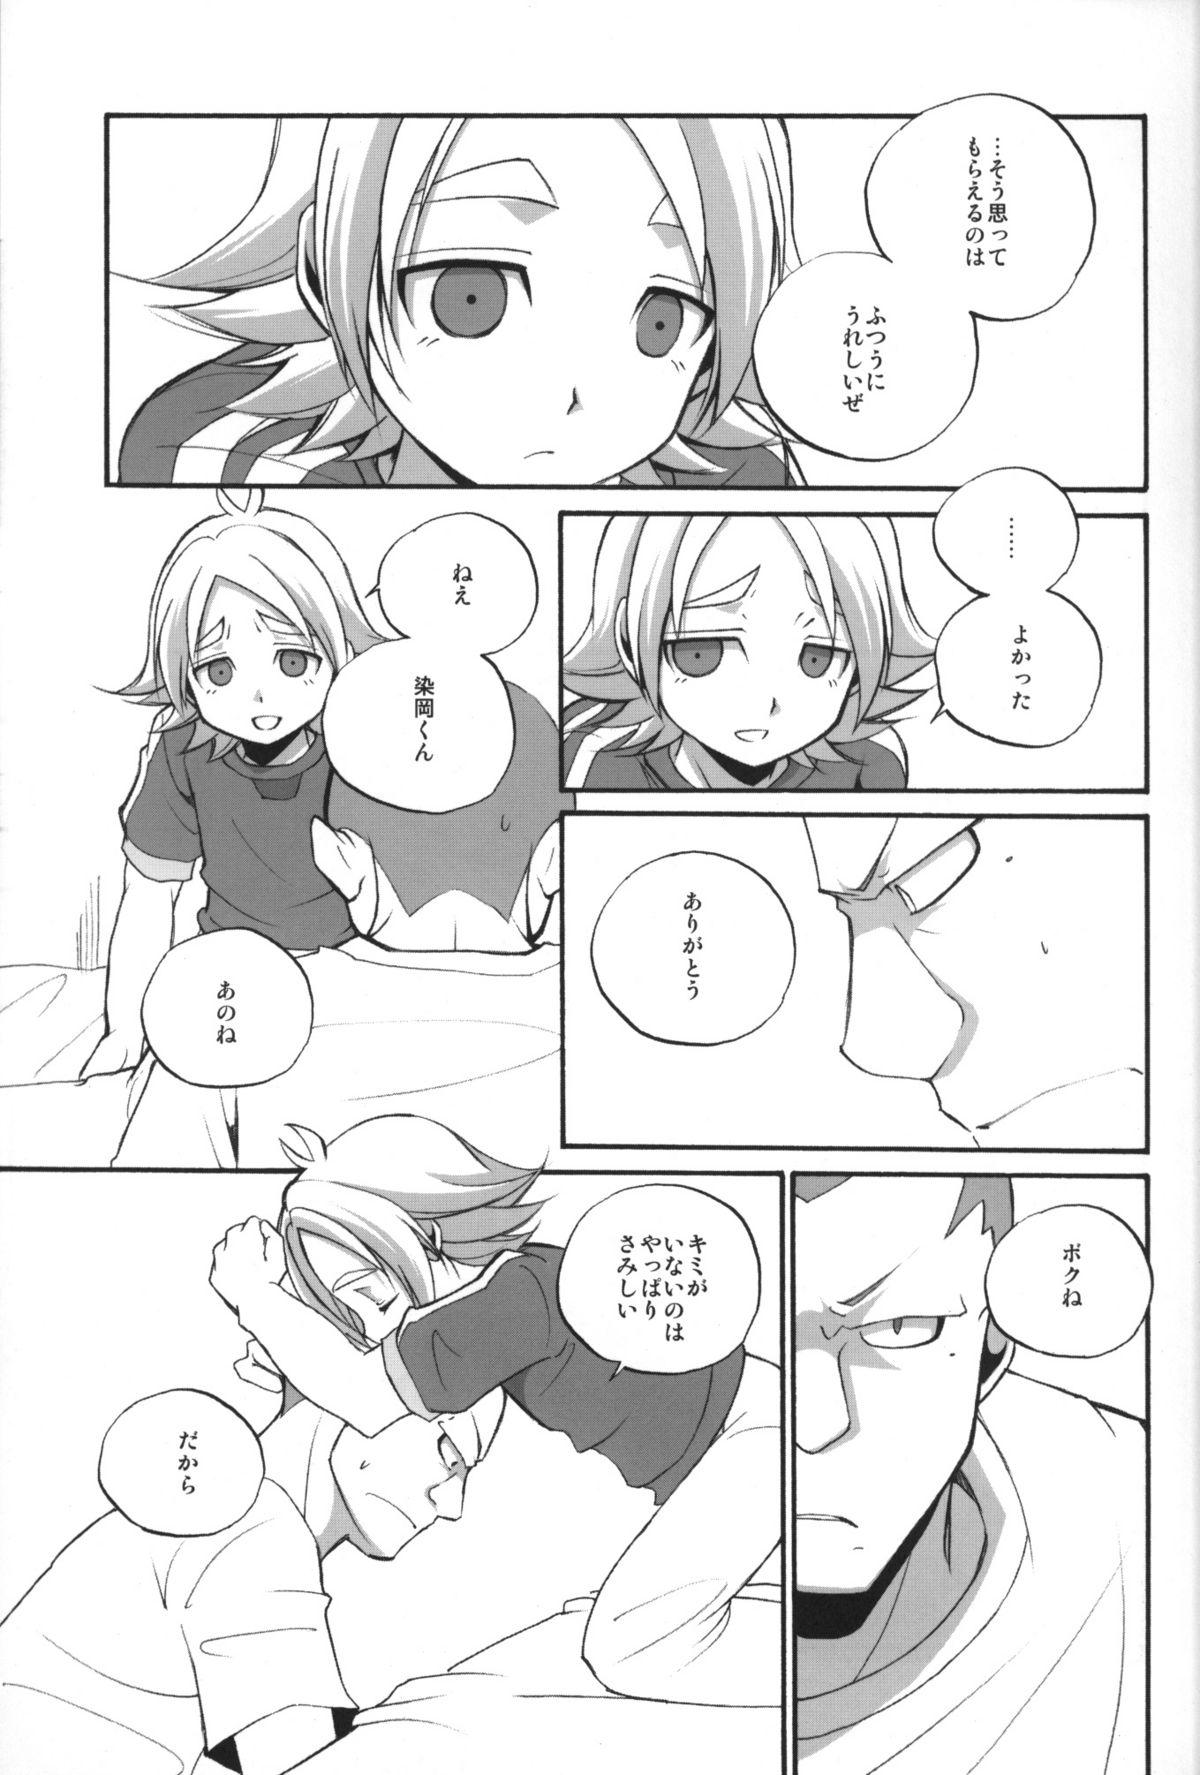 Ass To Mouth Prince emperor - Inazuma eleven The - Page 4